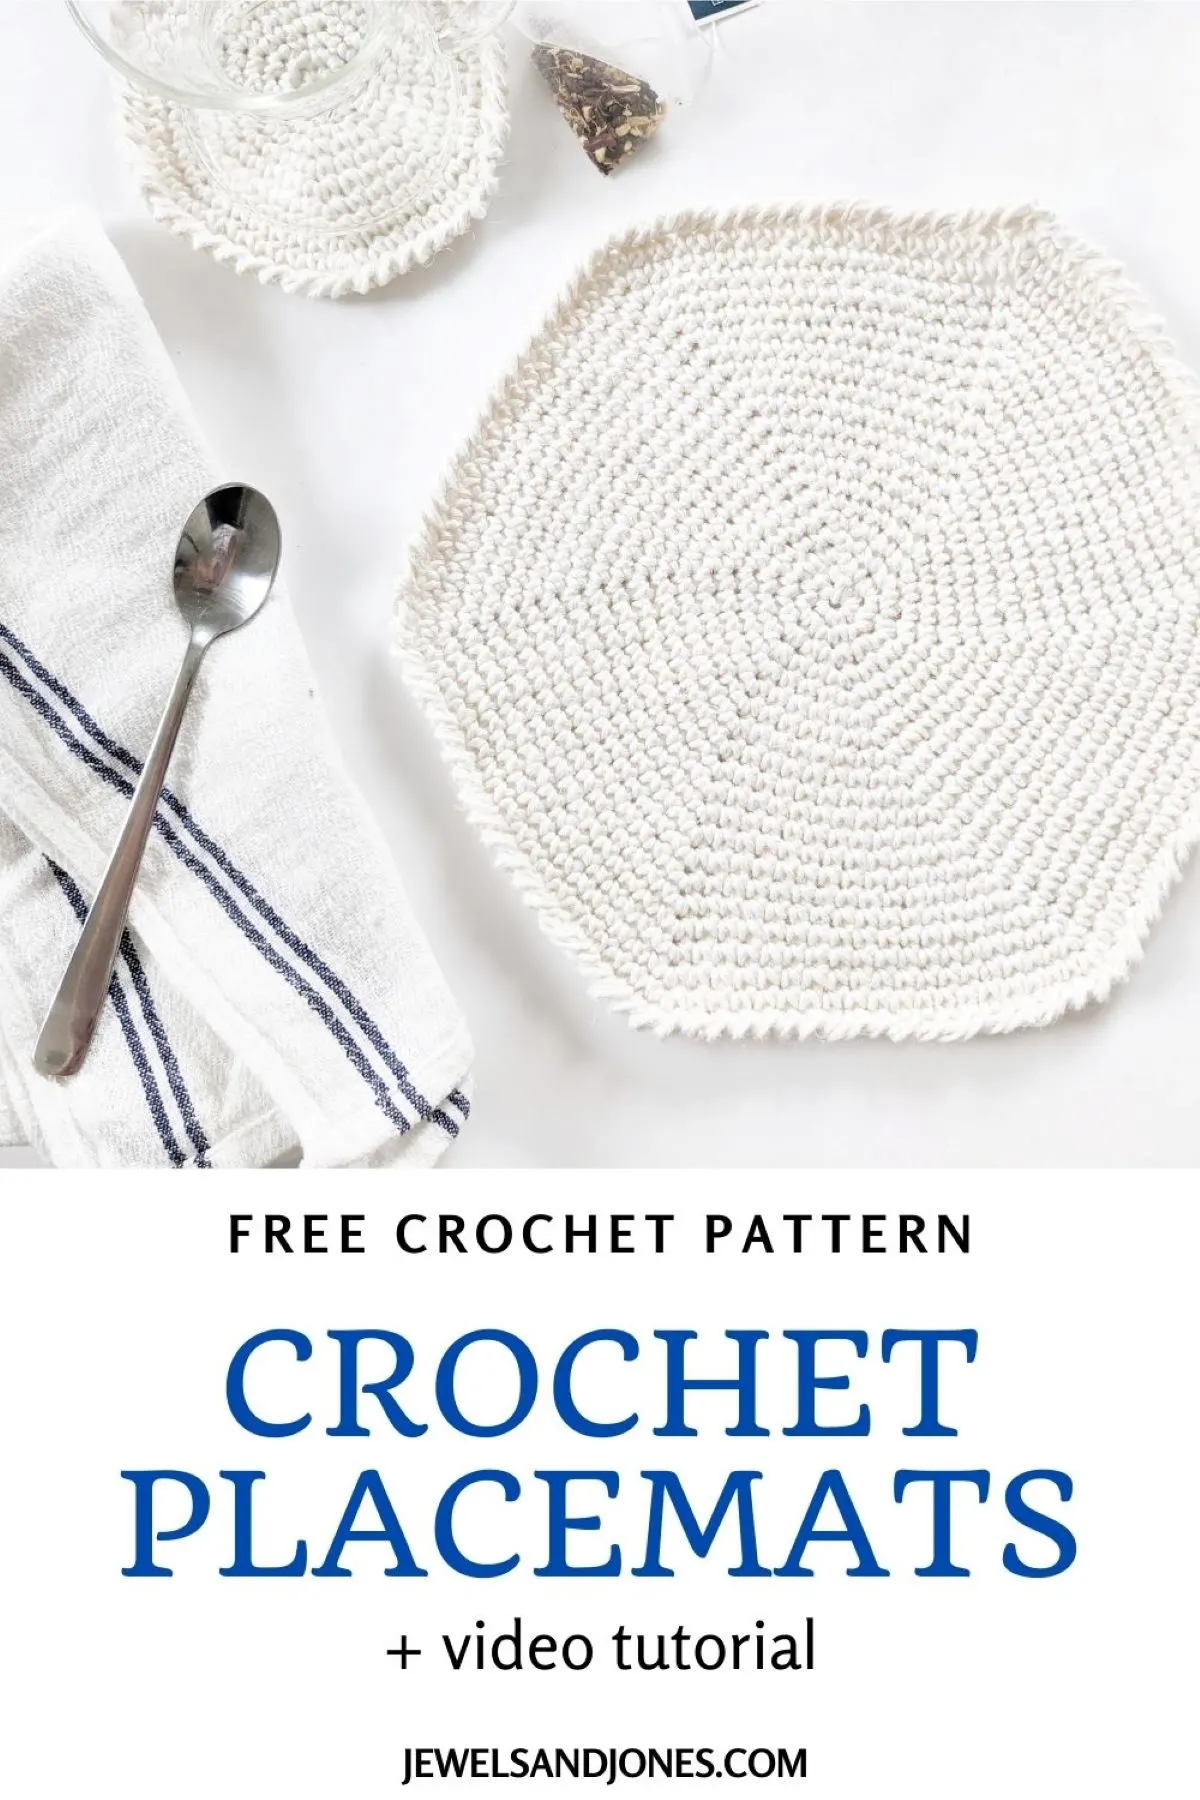 a picture to pin of the crochet placemat pattern